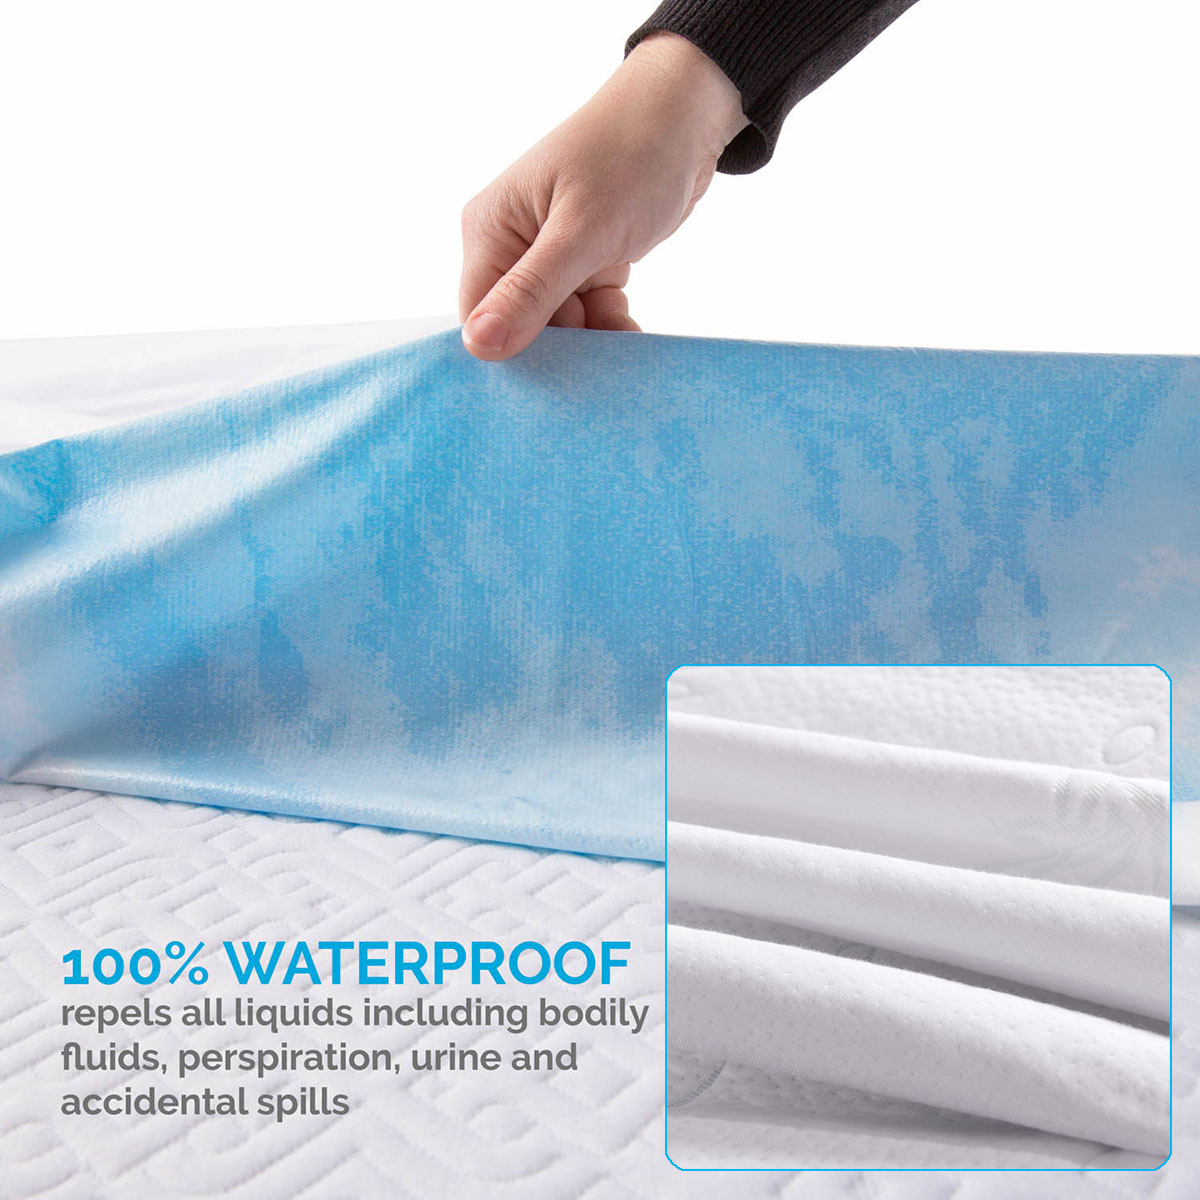 Waterproof-Bamboo-Jacquard-Mattress-Topper-Protector-Cover-Pad-Hypoallergenic-Bedding-Set-1688692-3